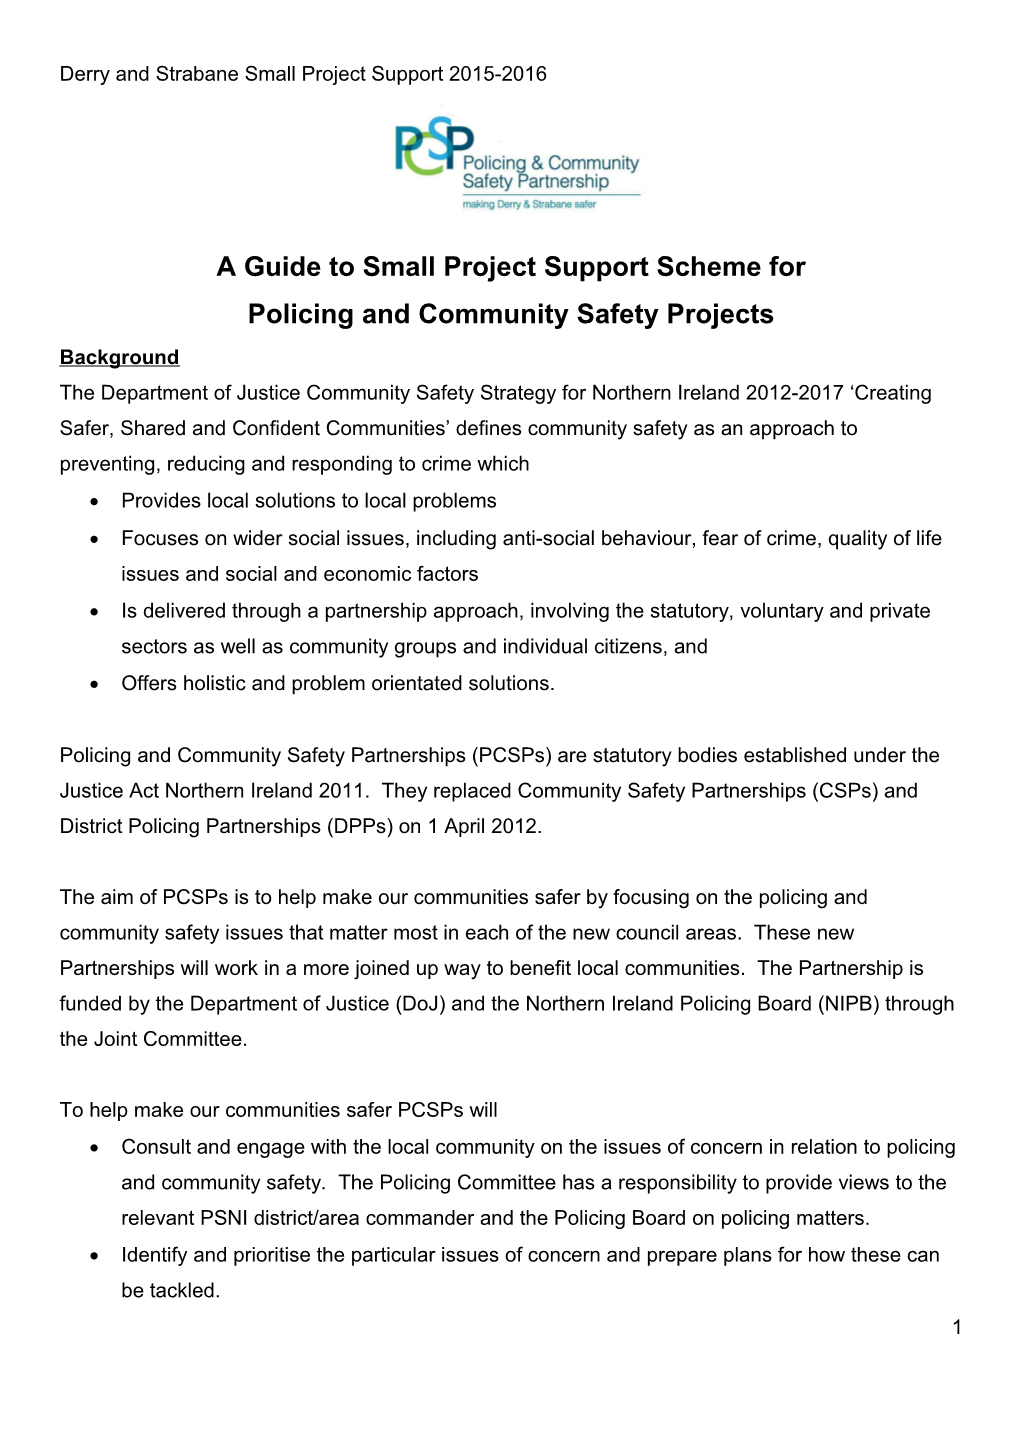 A Guide to Small Project Support Scheme For